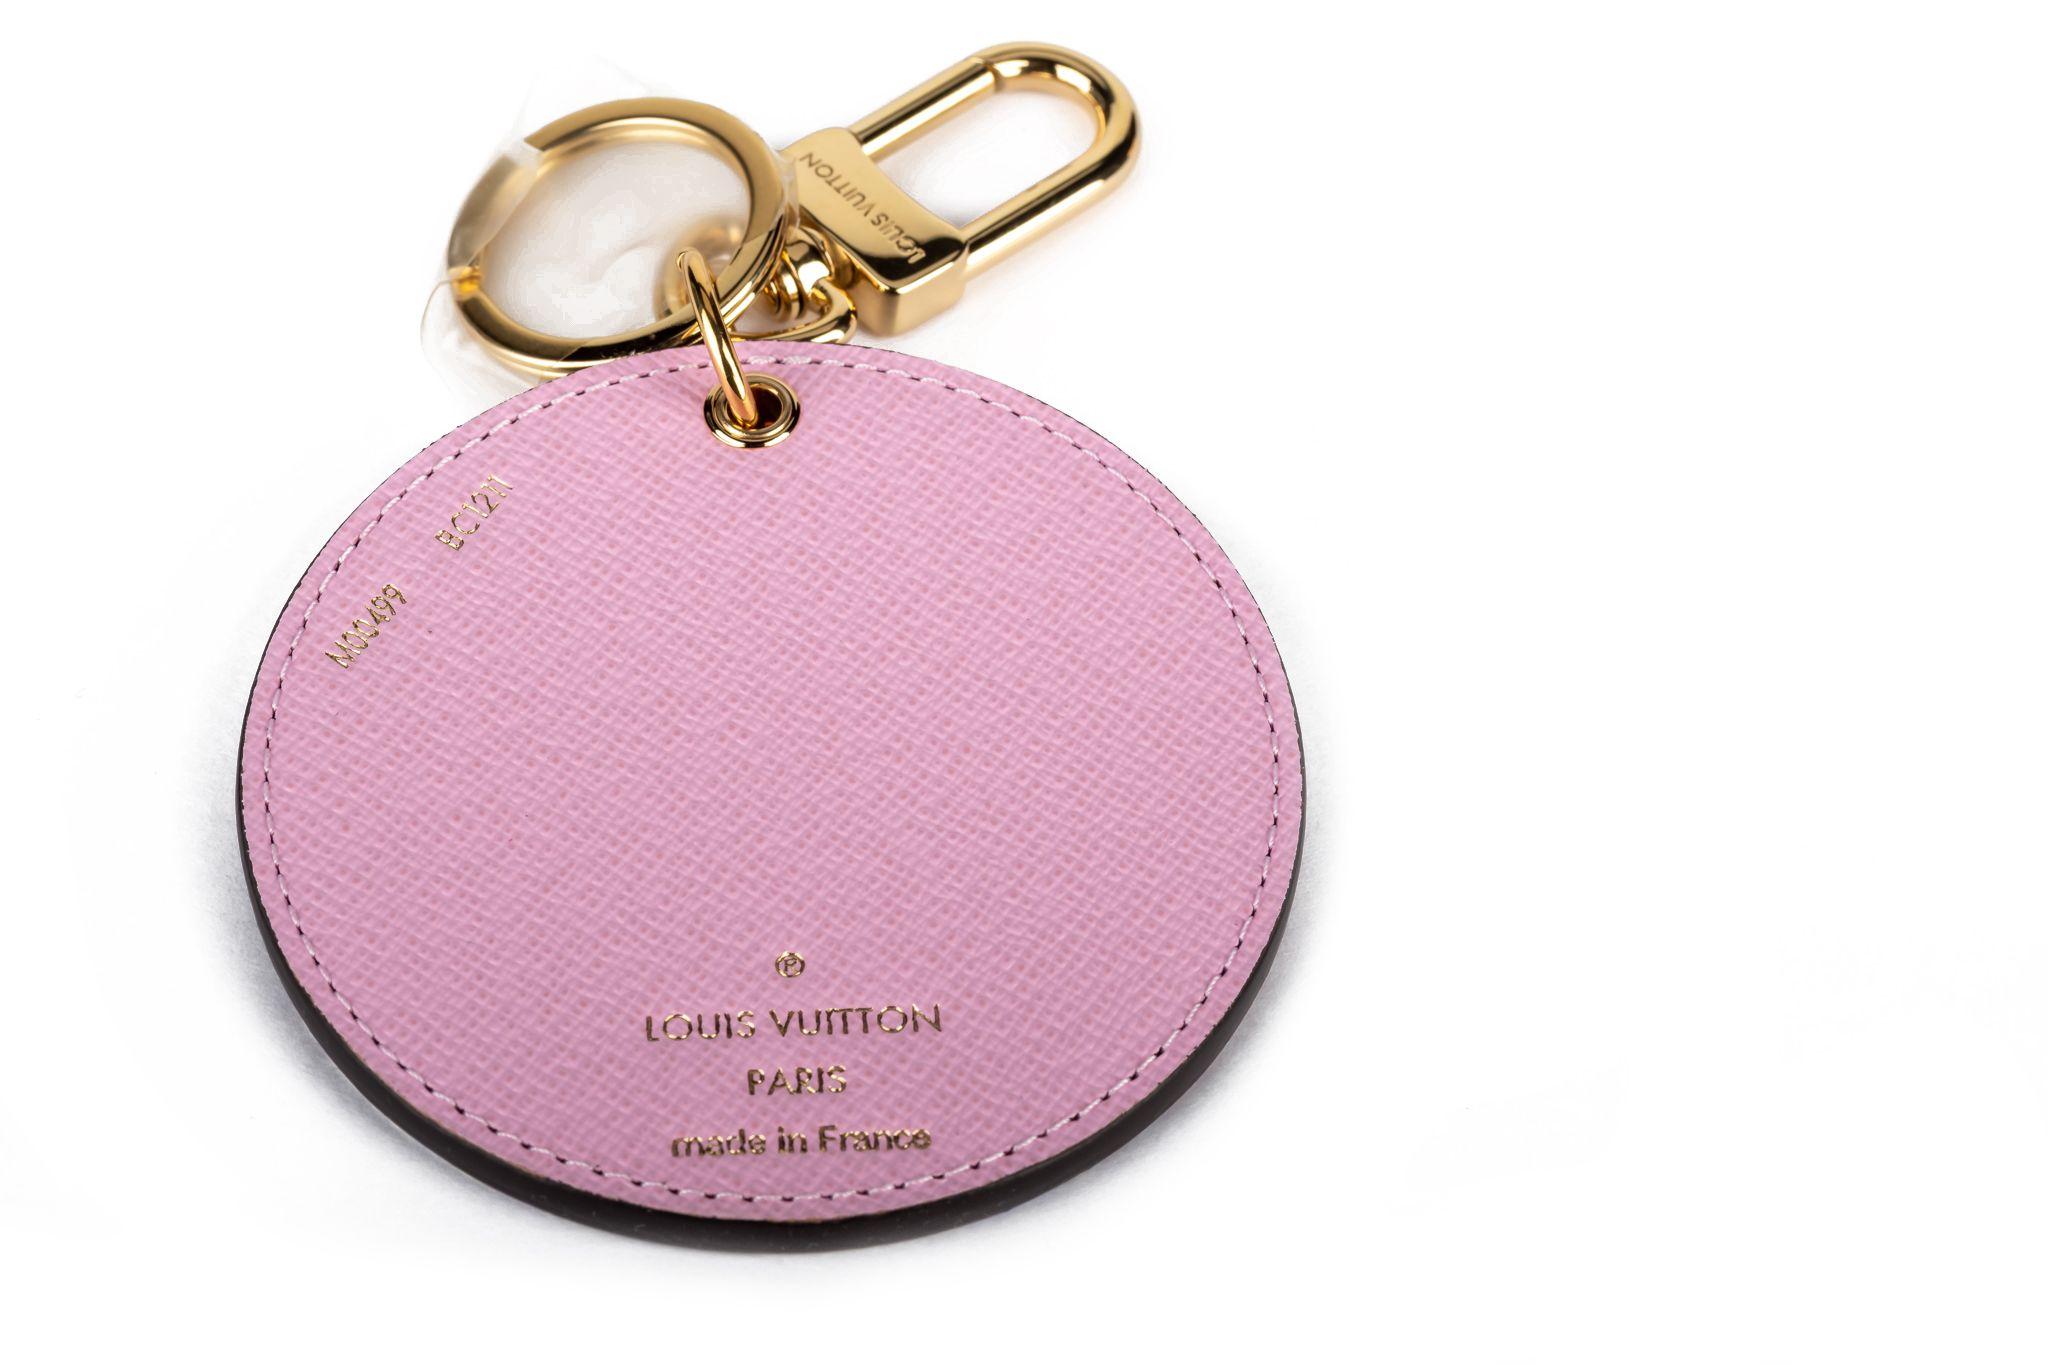 This Louis Vuitton Monogram 2021 Christmas Animation Japanese Garden Bag Charm Key Ring is a disk of Louis Vuitton monogram coated canvas, with a delightful print of House mascot Vivienne in a Japanese garden. The charm features a pink cross-grain